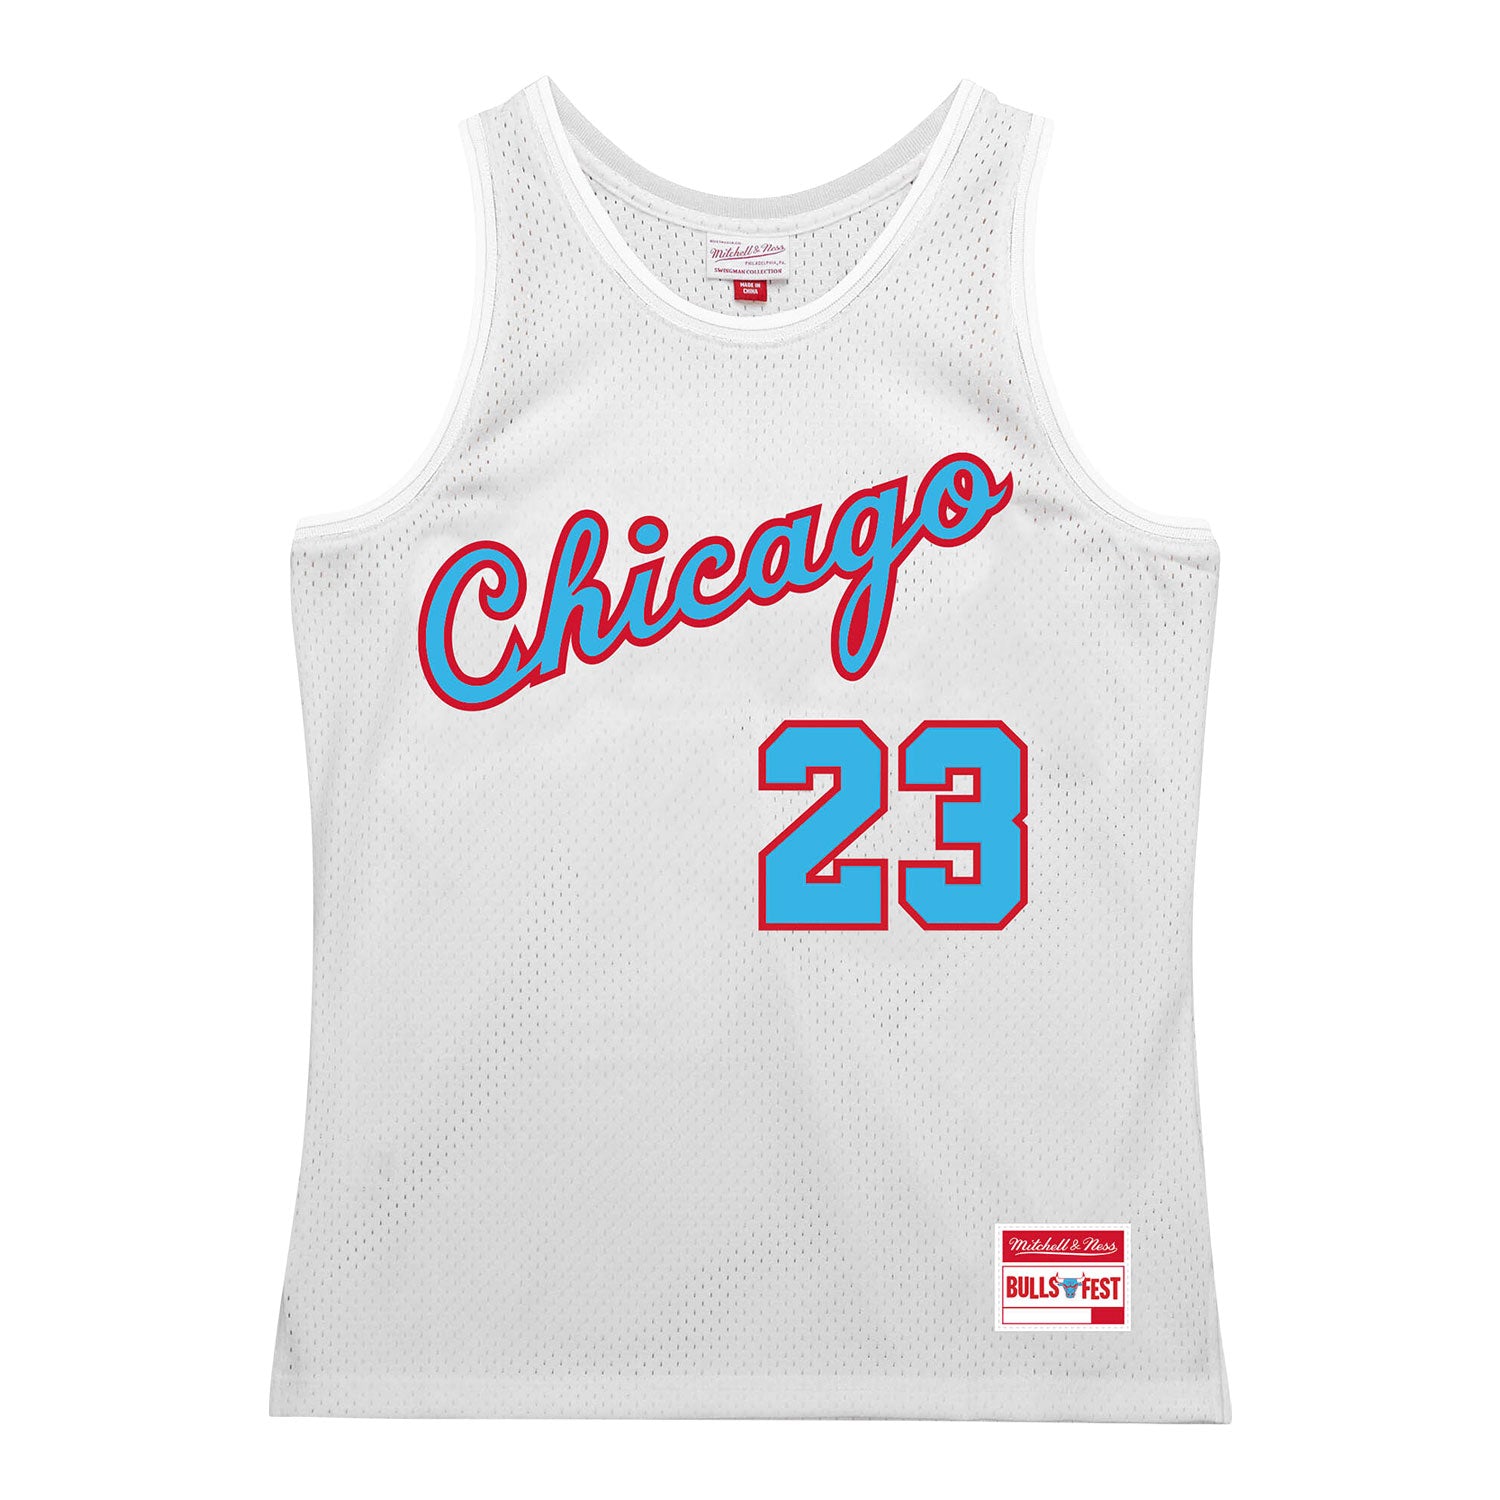 Nike Chicago Bulls City Edition gear available now